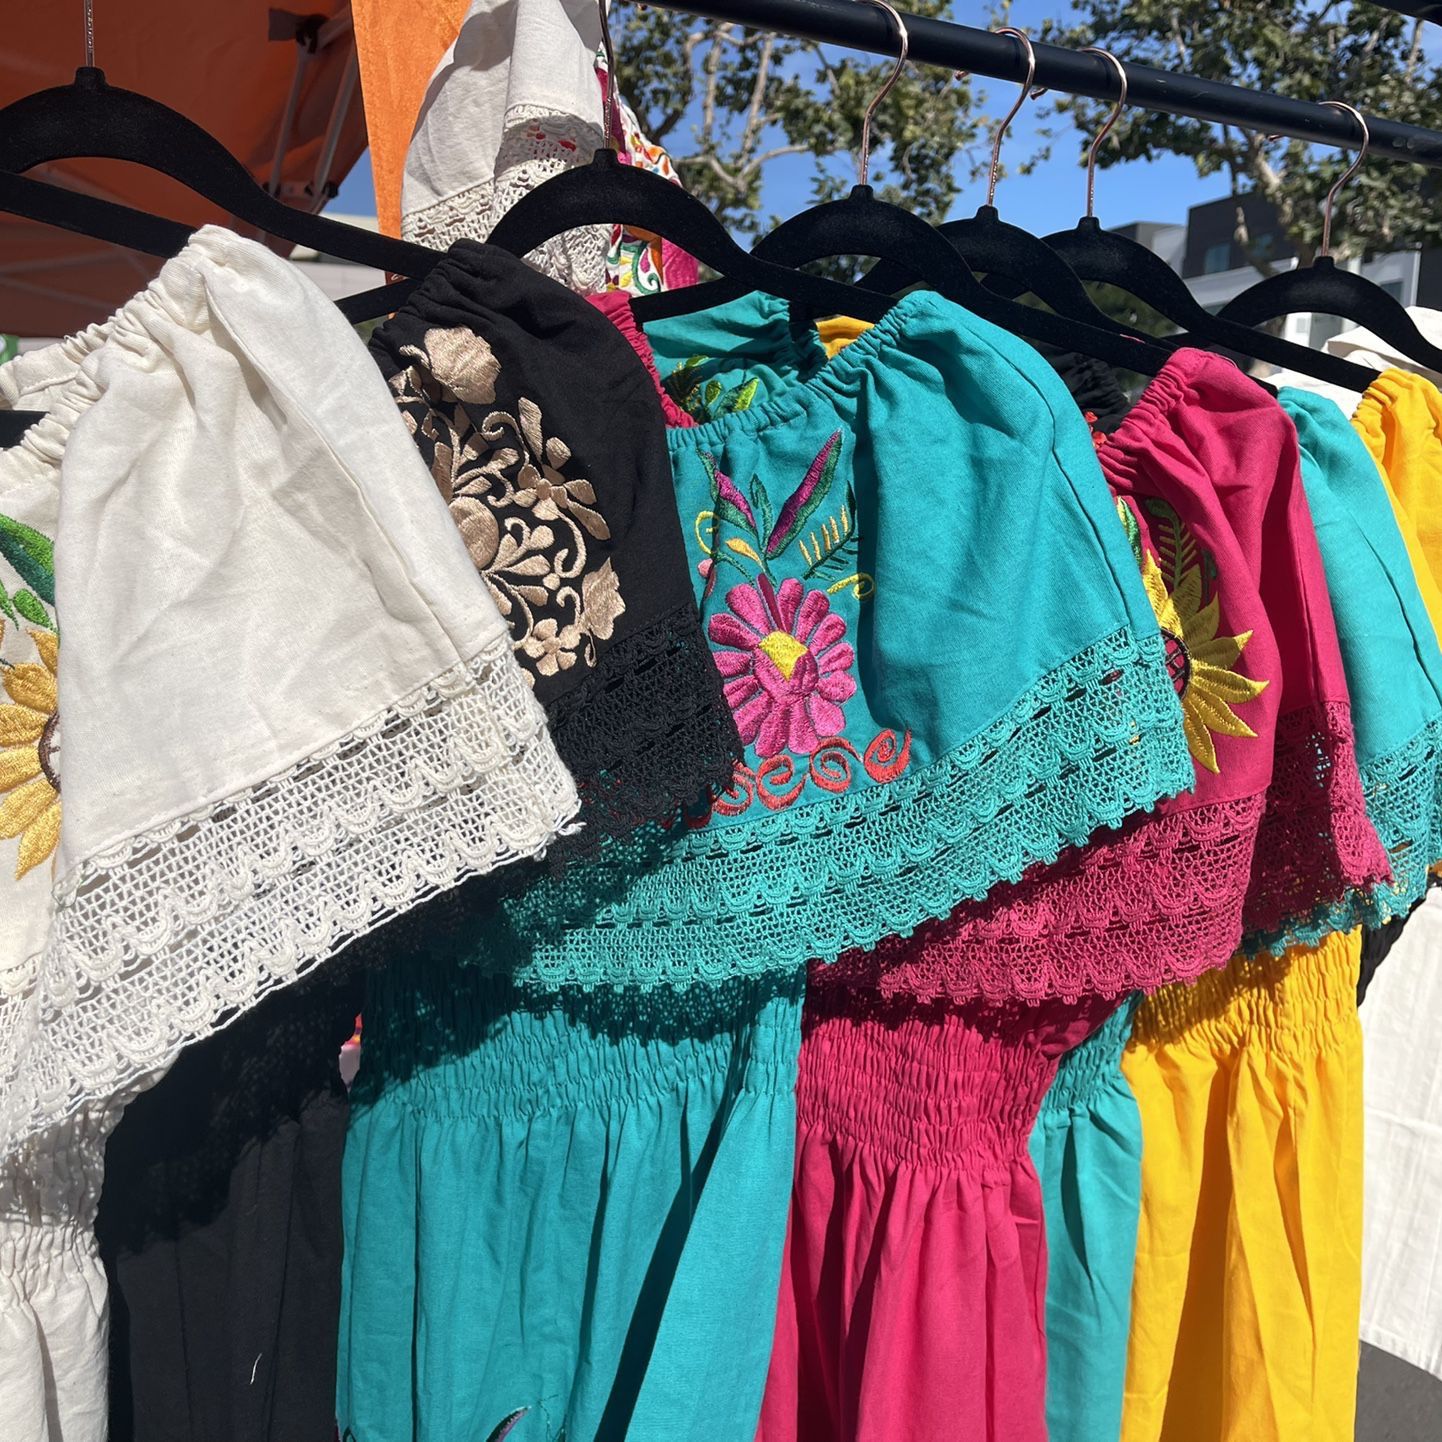 Embroidered Mexican Shirts And Dresses / Blusas Mexicanas Bordadas Sizes Small To 3X JUST IN!! GUAYABERAS!!